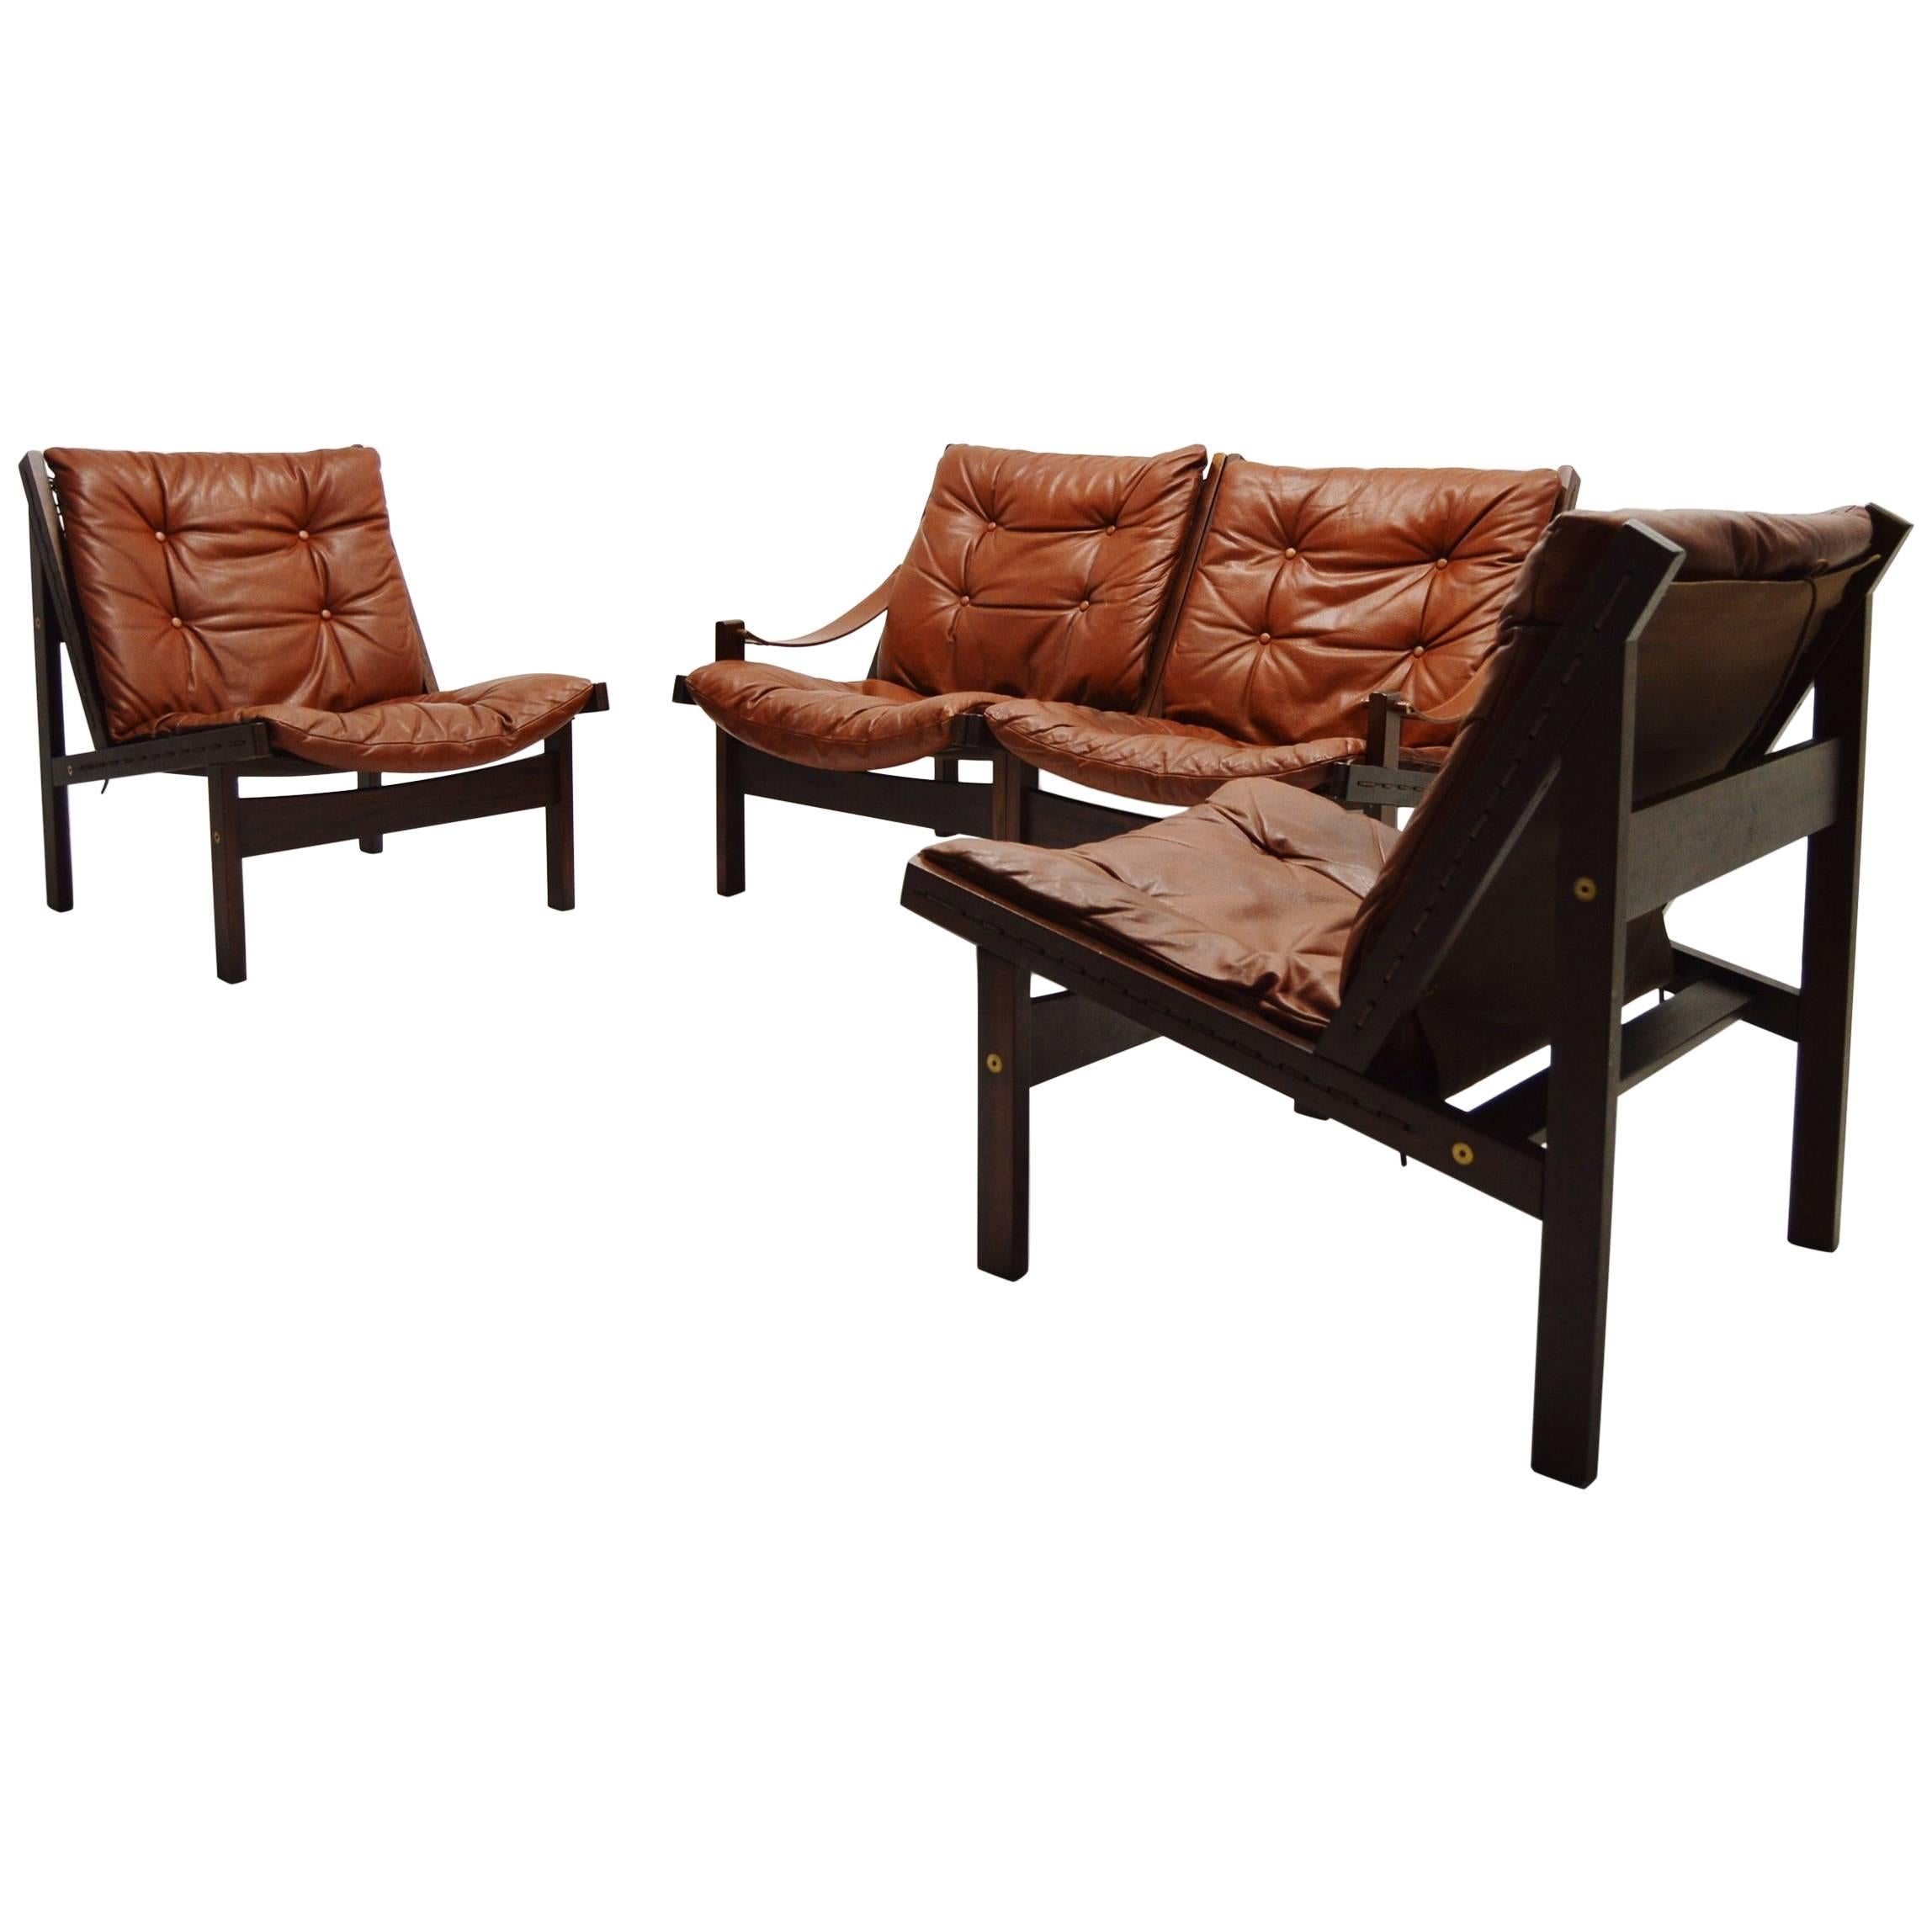 Torbjorn Afdal Hunter Modular Leather Sofa and Easy Chairs For Sale